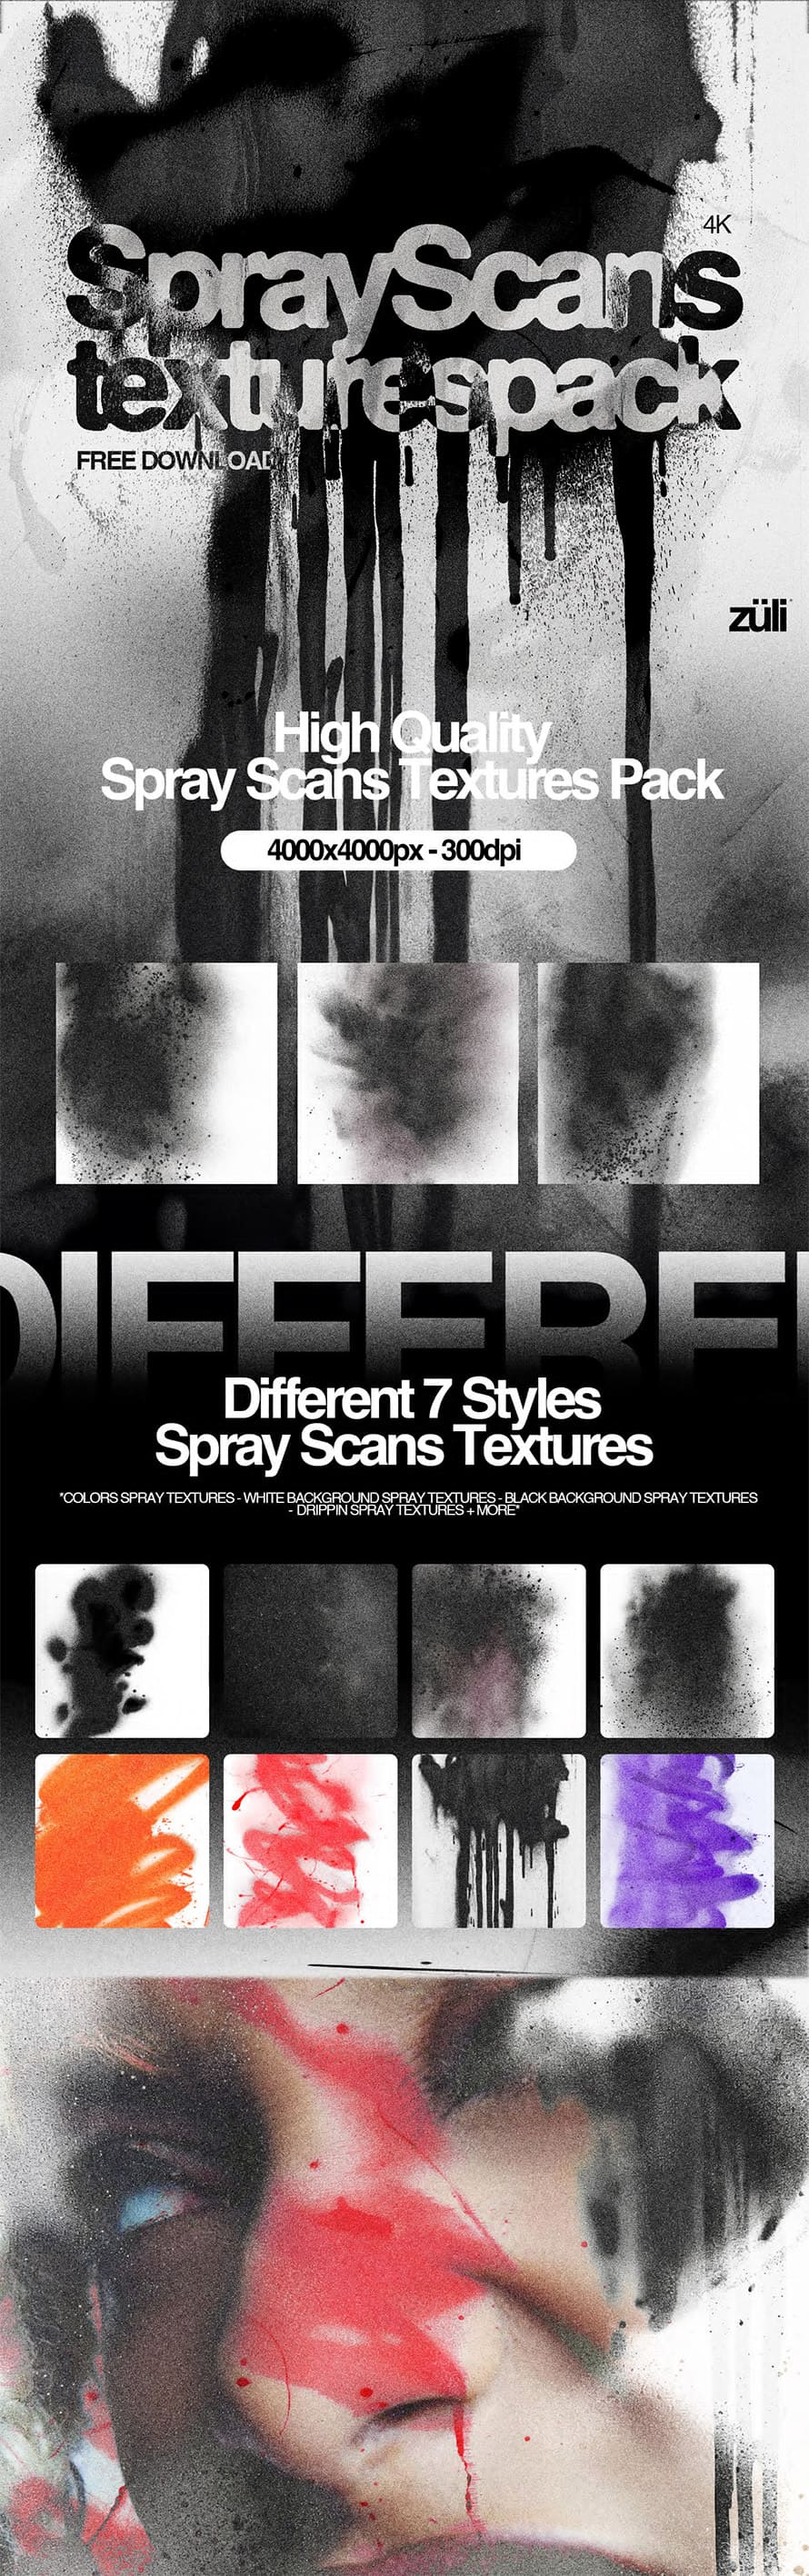 Free Spray Scans Textures Pack